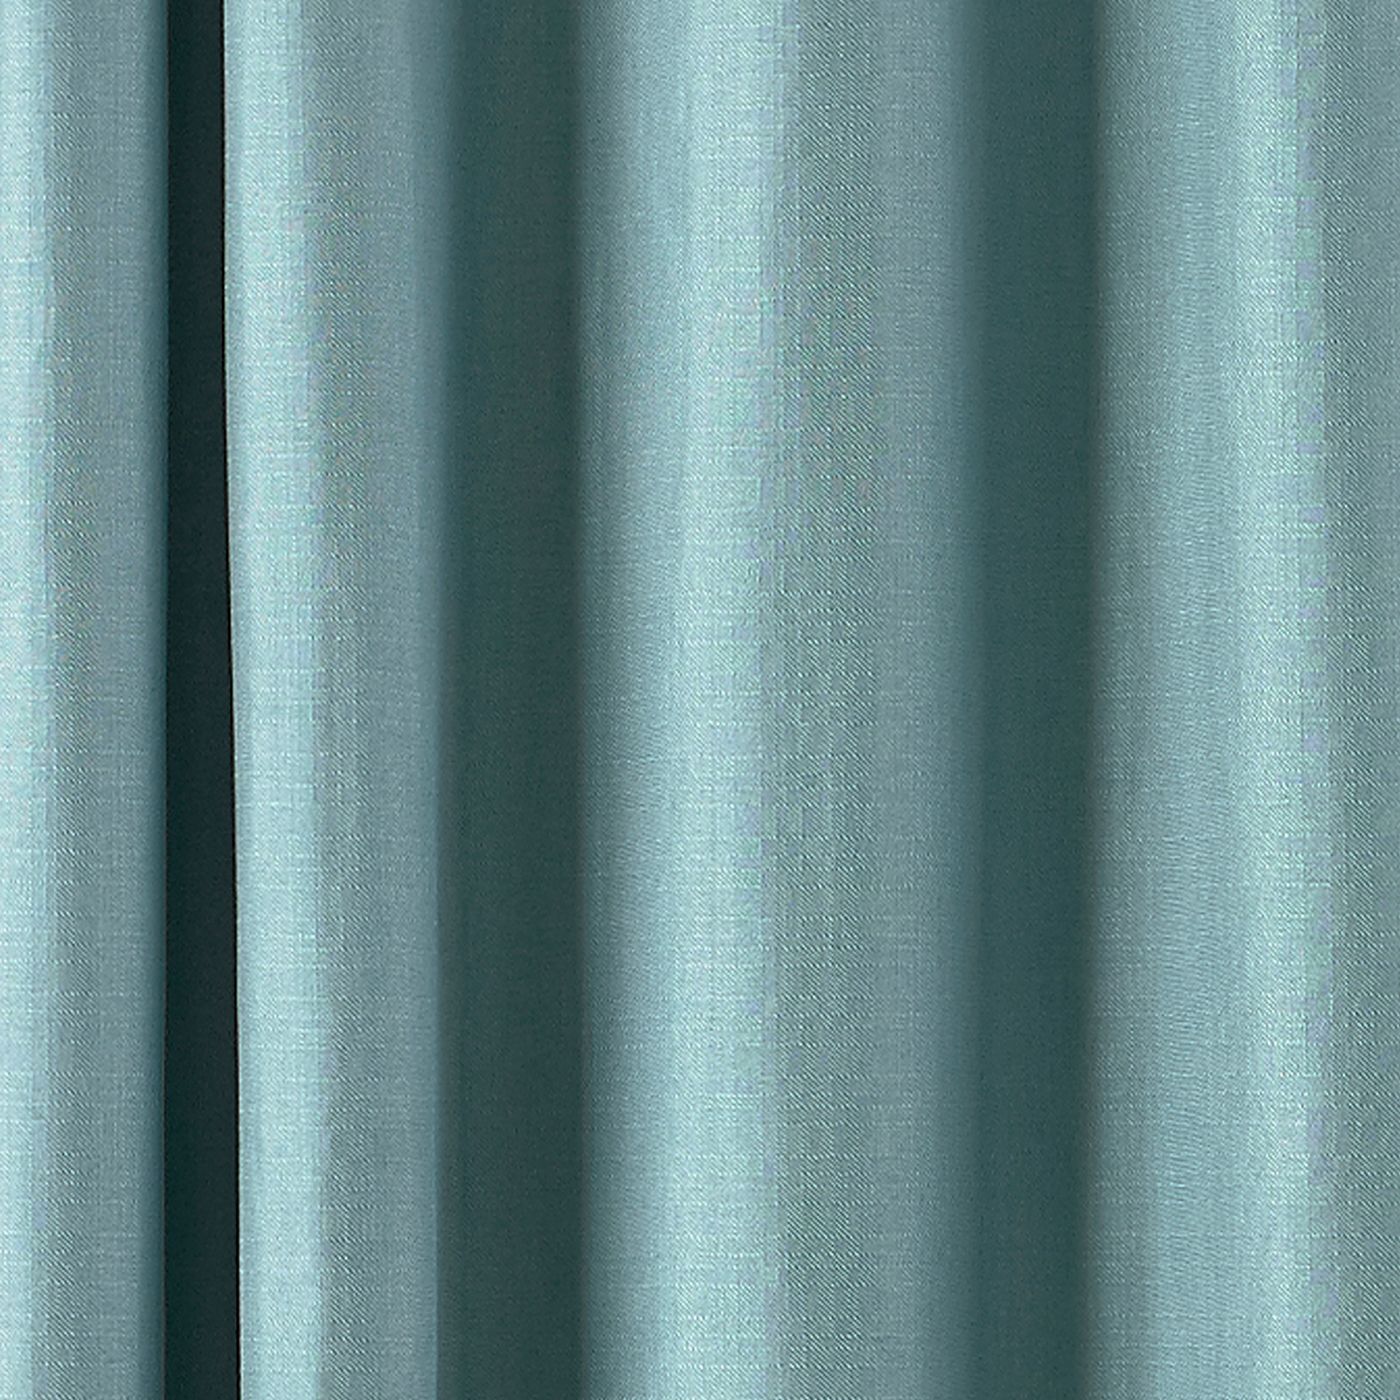 The Atlantic curtains feature a plain twill woven fabric in a range of earthy tones to suit any home style.  Made of 100% robust polyester these curtains don’t stain easily. With stainless steel eyelet holes the Atlantic curtains are easy to hang and only require a curtain pole for installation and come in a range of sizes to fit any window area.